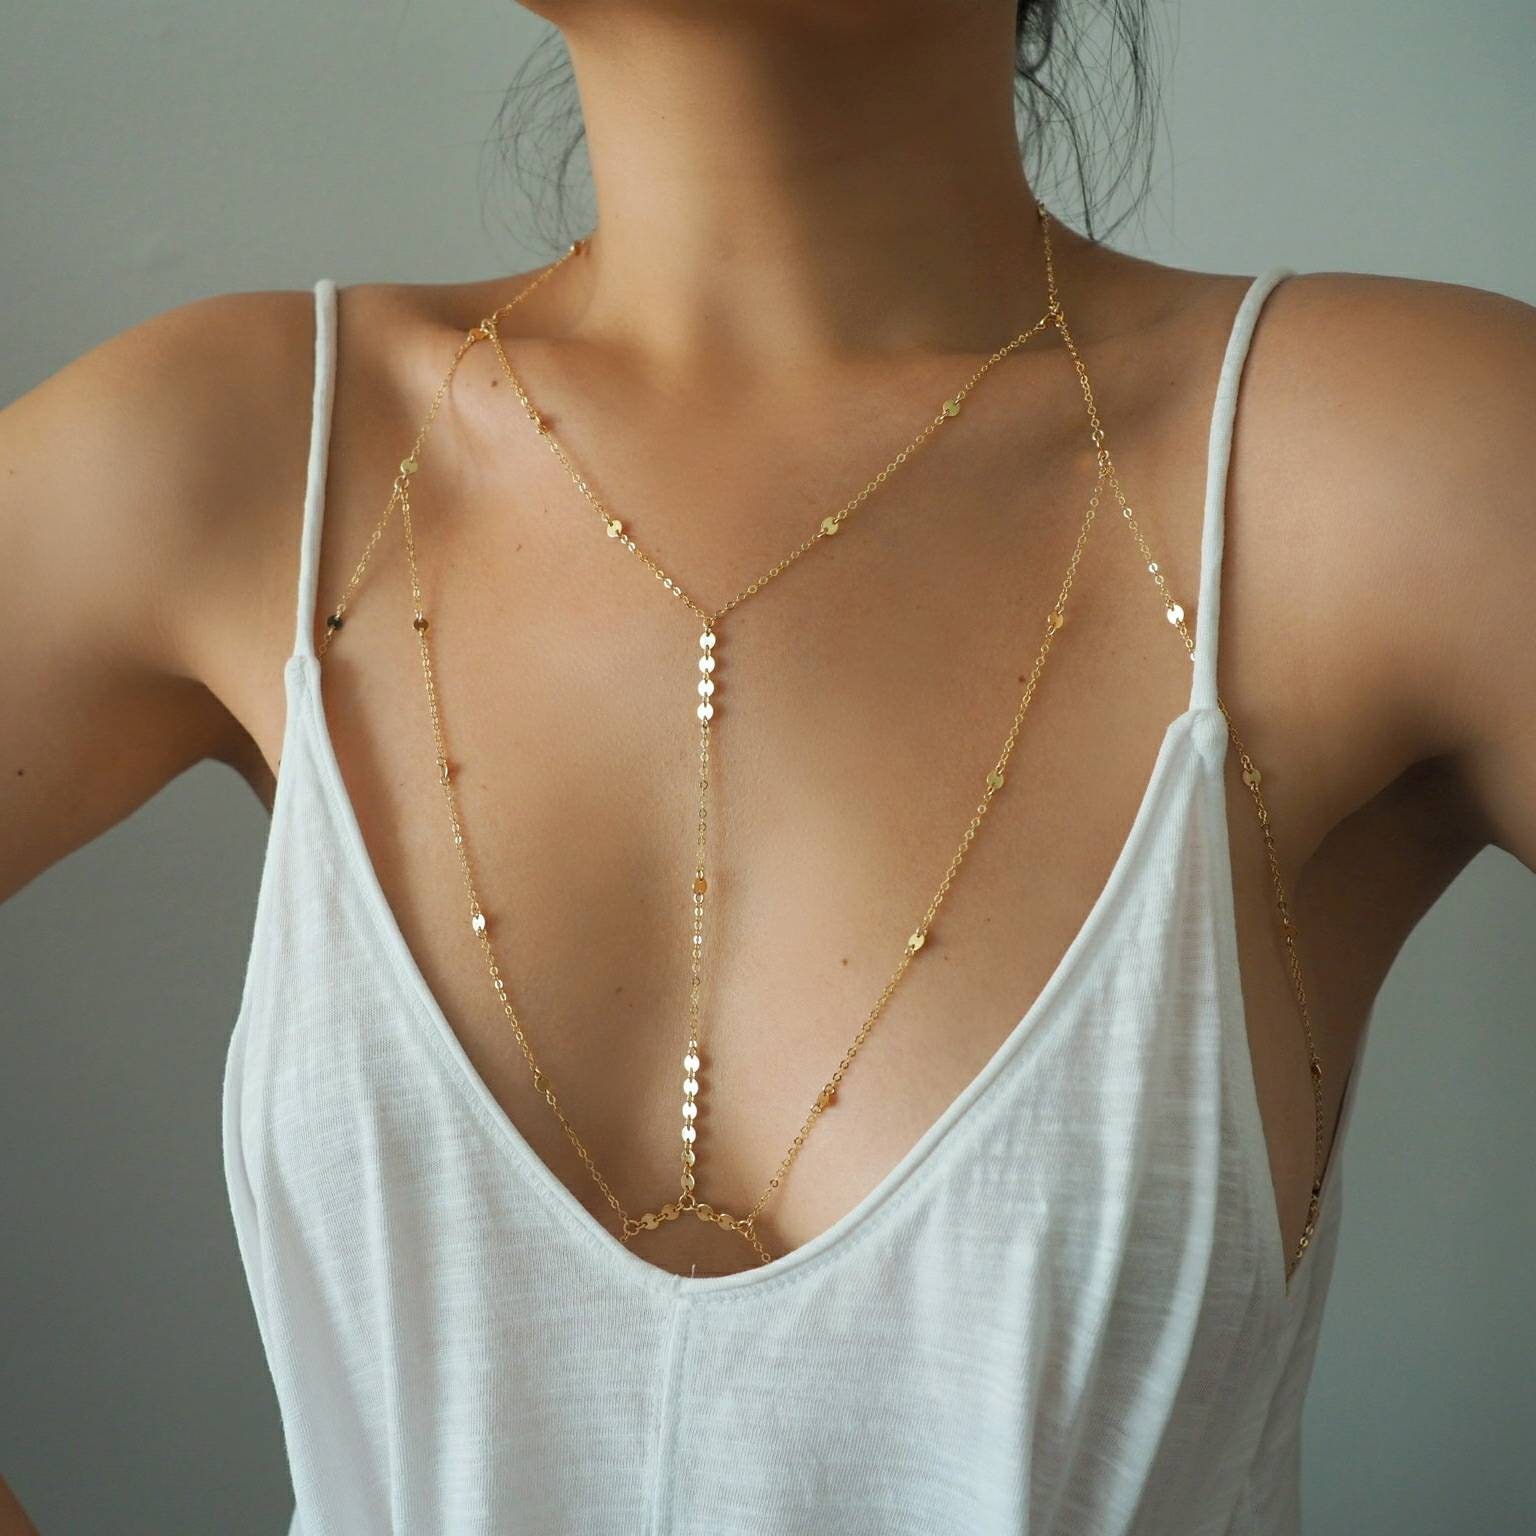 14k GOLD Filled Tiny Coins T-row Dainty Chain Bralette Halter Top Body  Chain Chain Bralette -  Finland